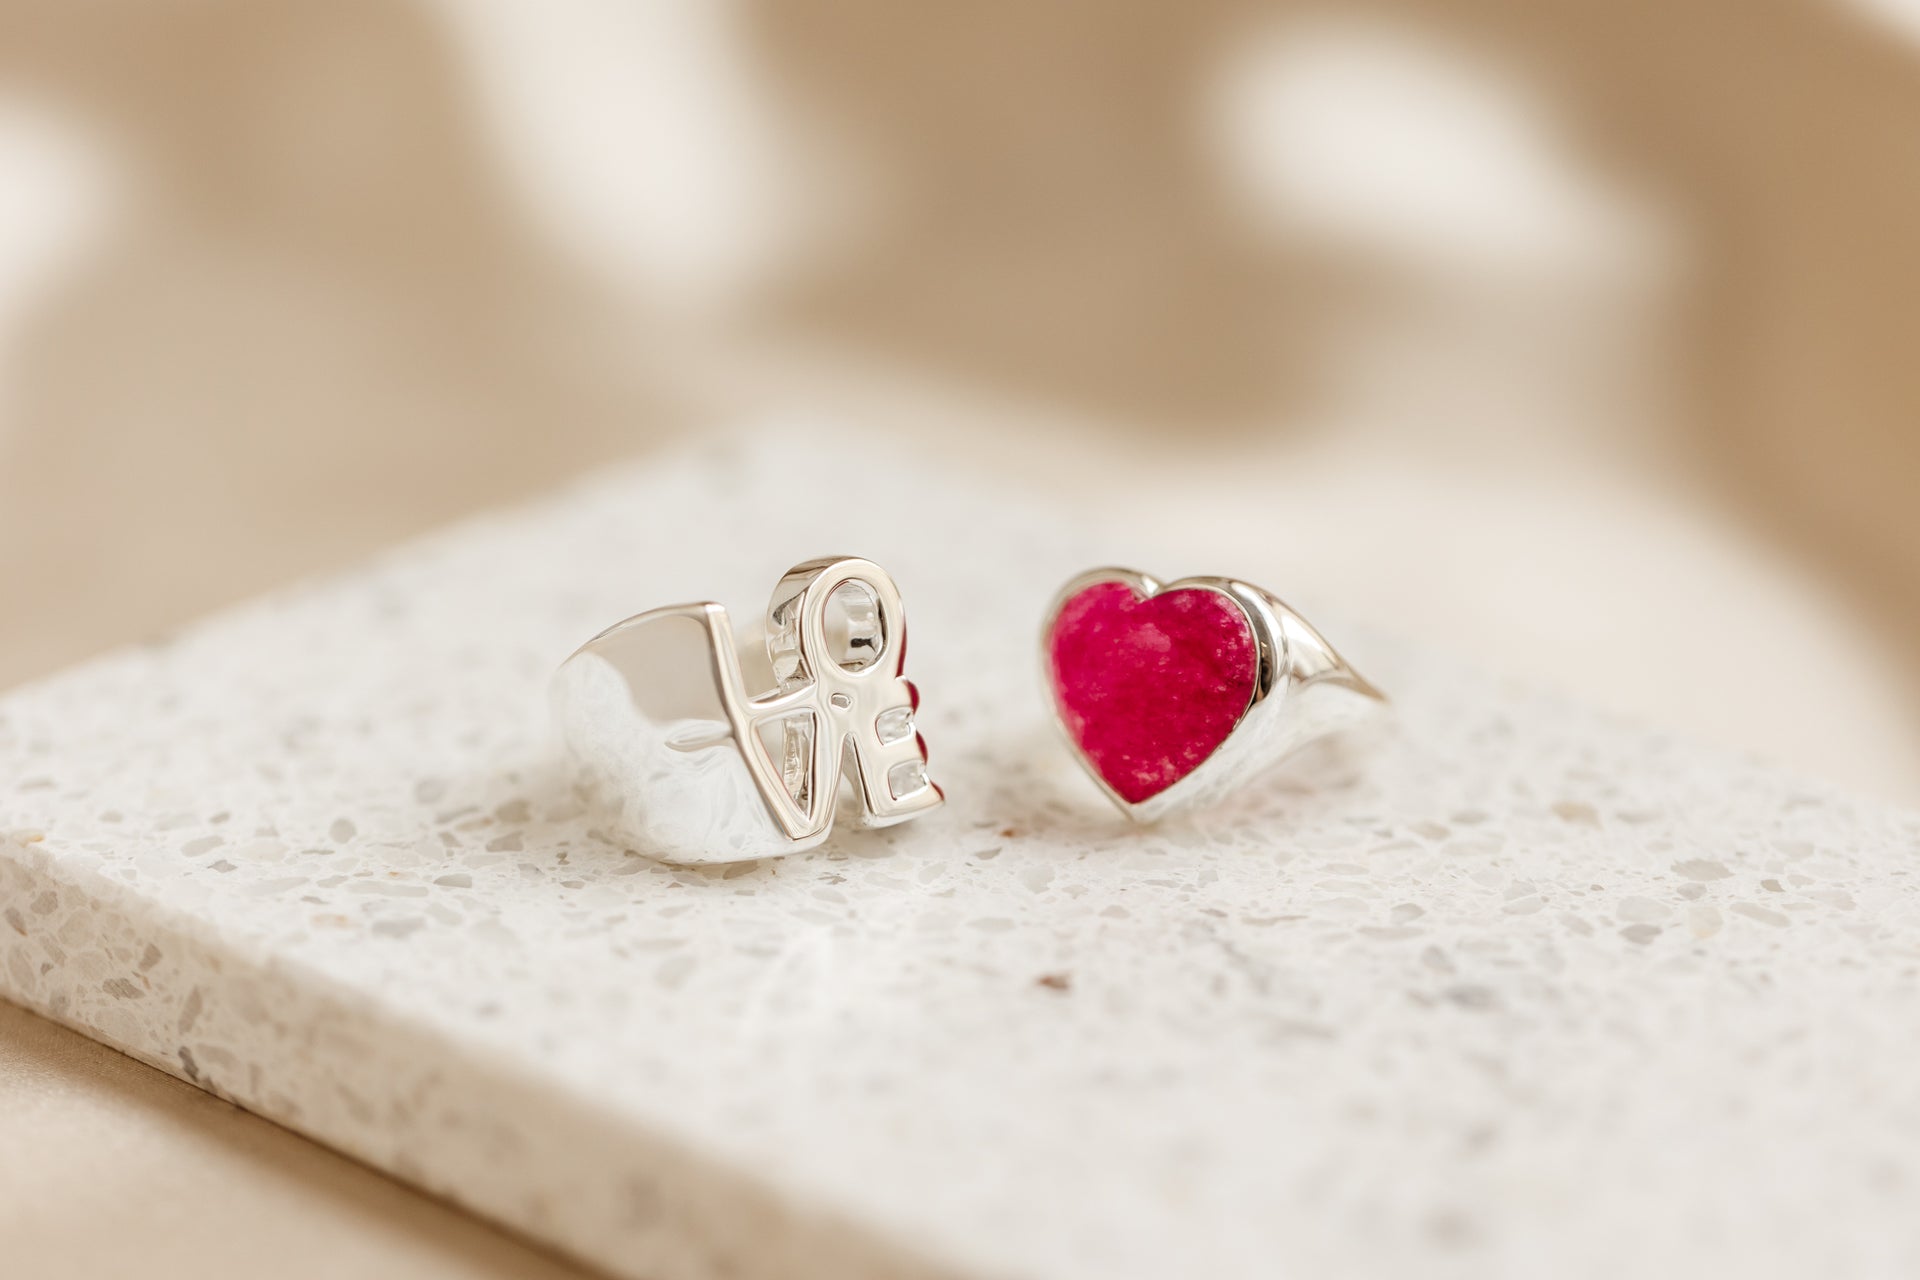 A big silver ring with the word "love" next to silver ring with a big pink quartz heart